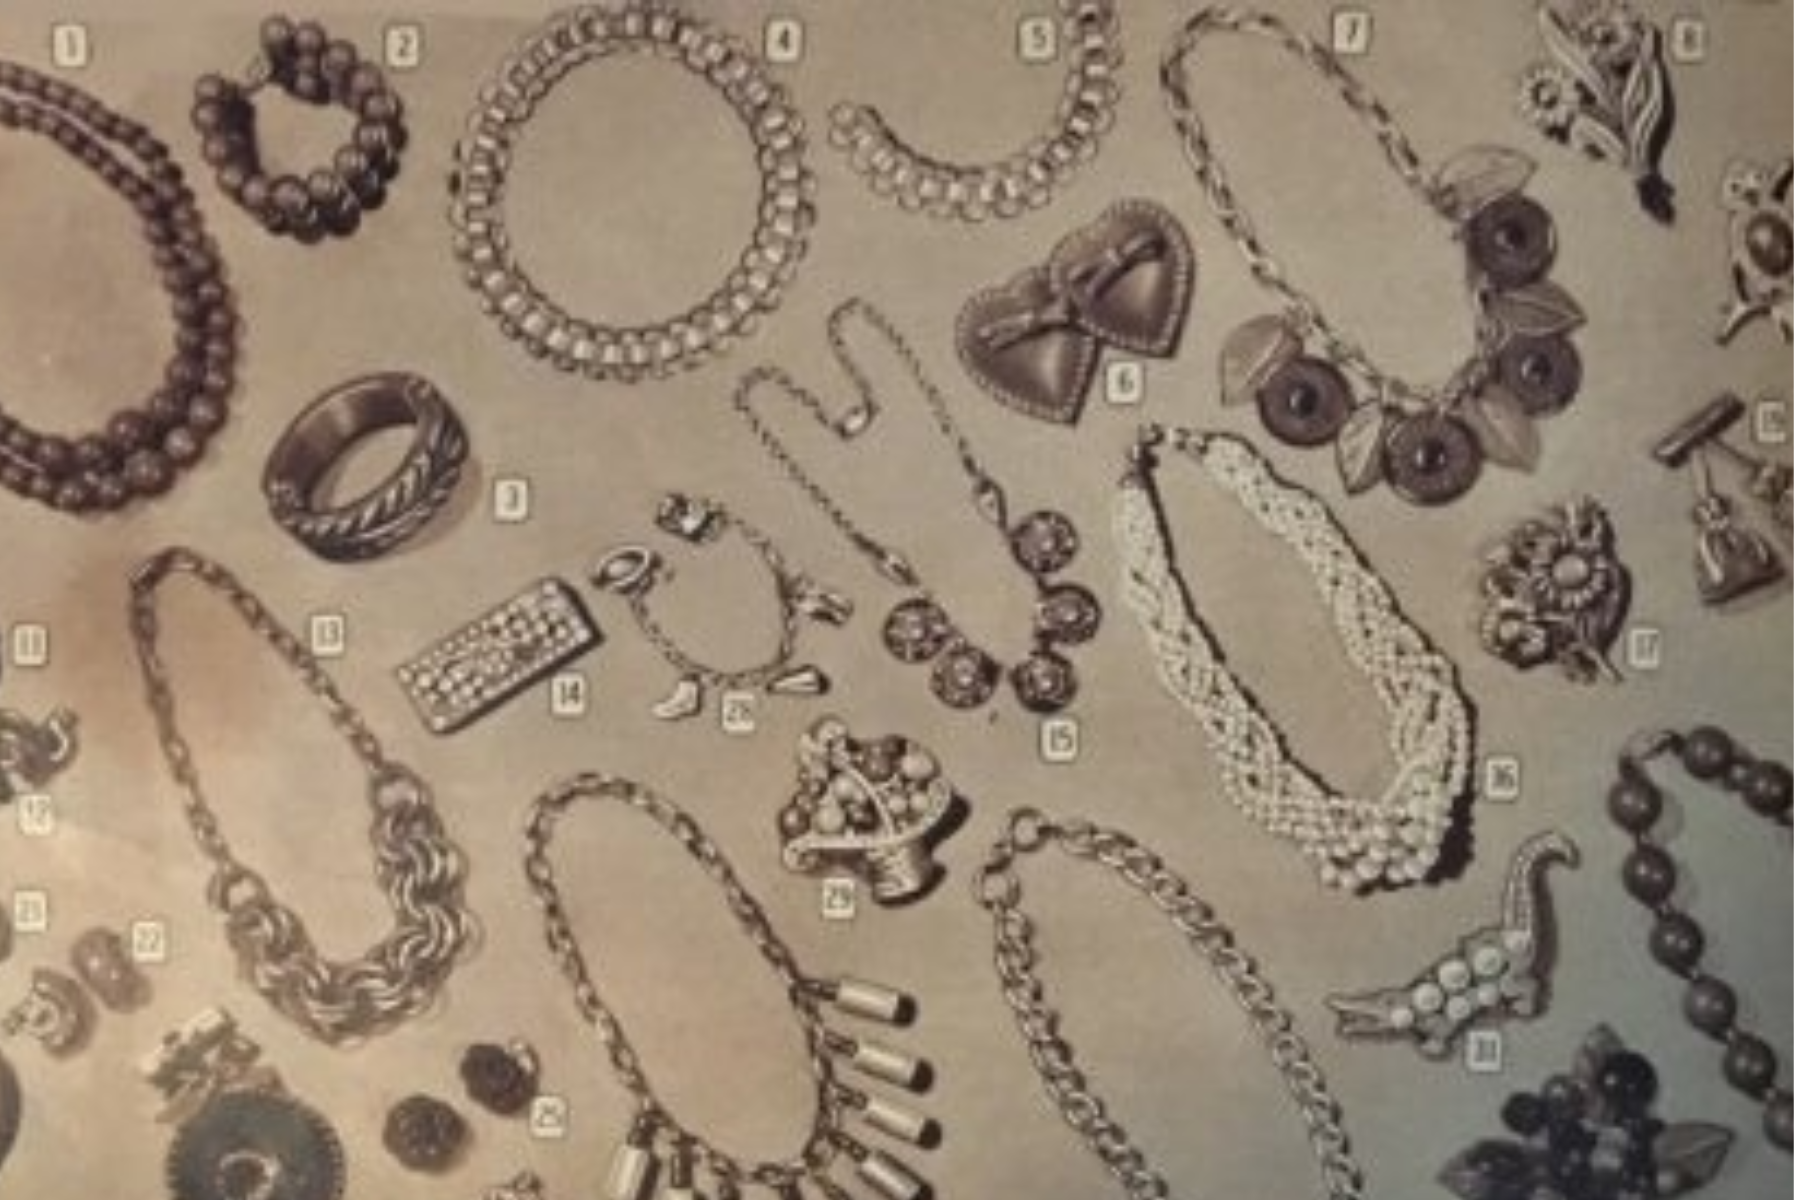 A collection of various vintage silver jewelry designs